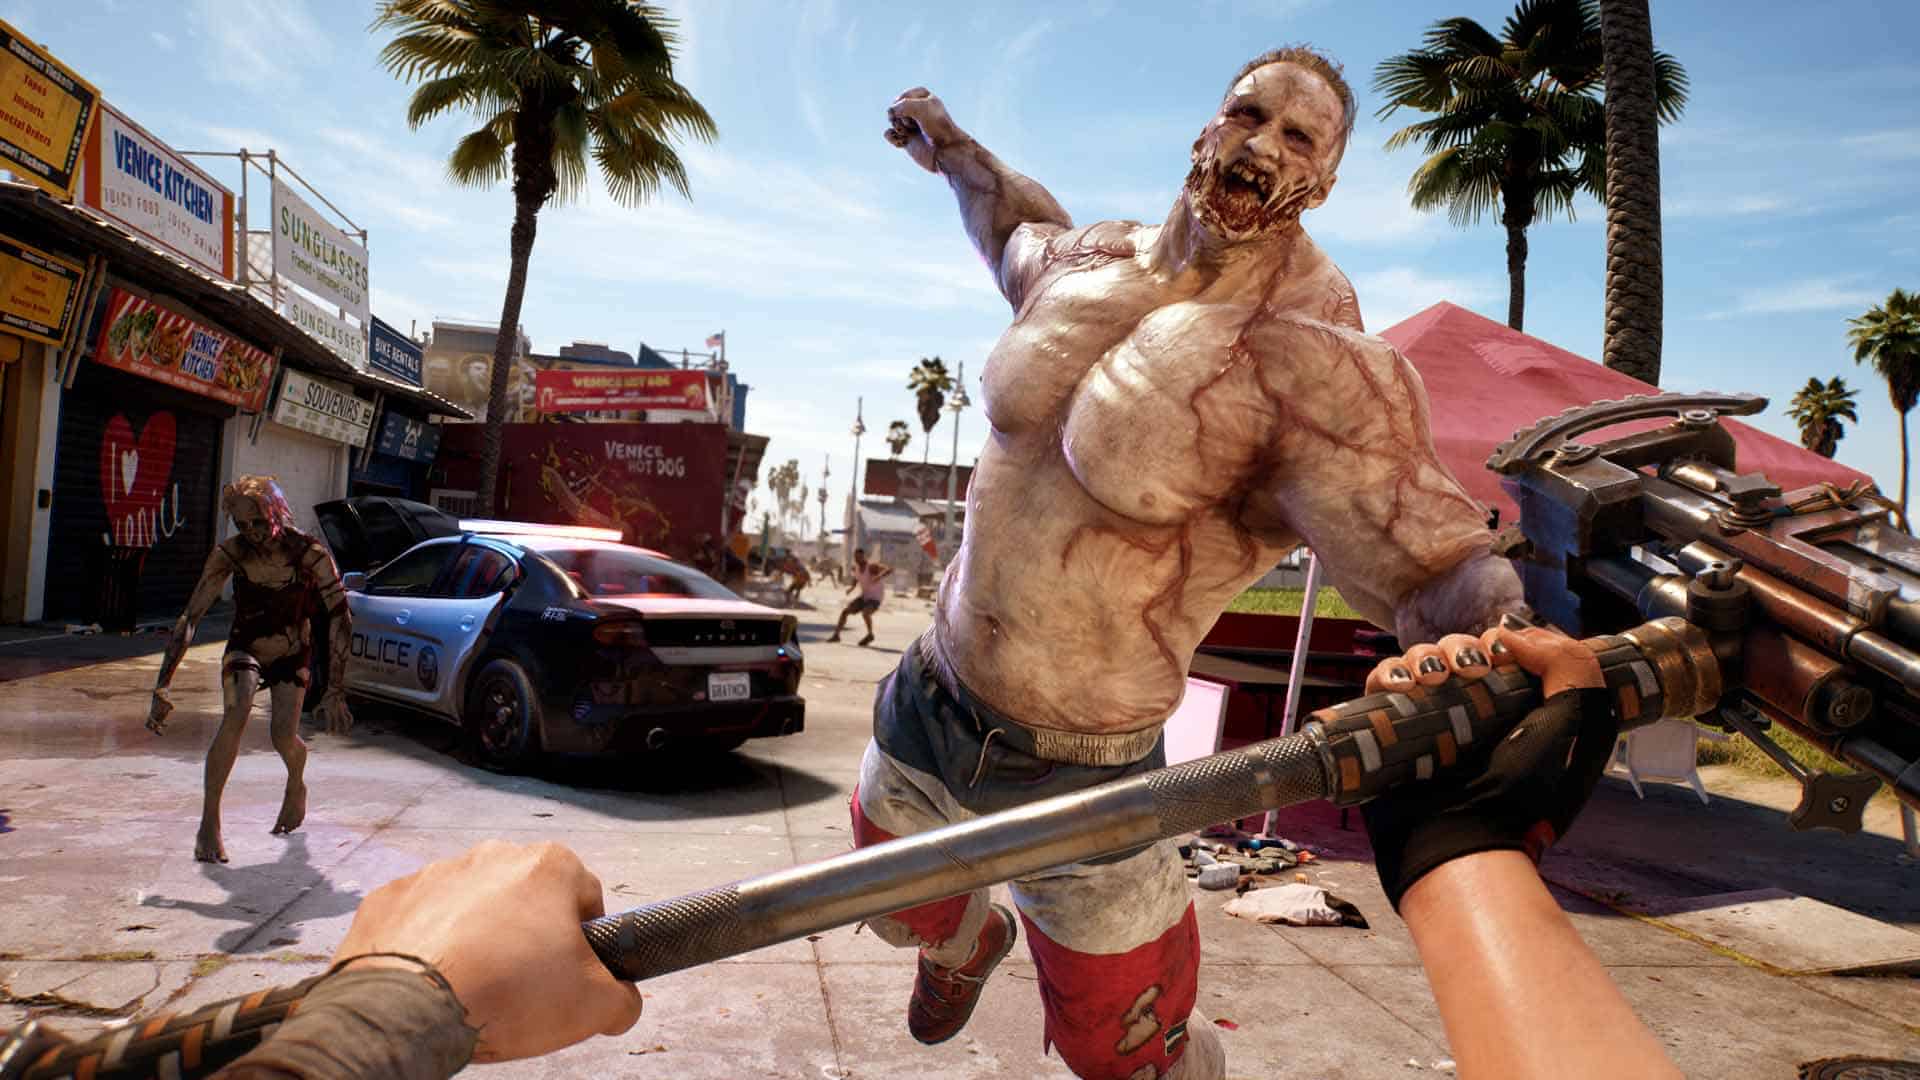 Dead Island 2 download size PC, PS5 and Xbox – how much space do you need?